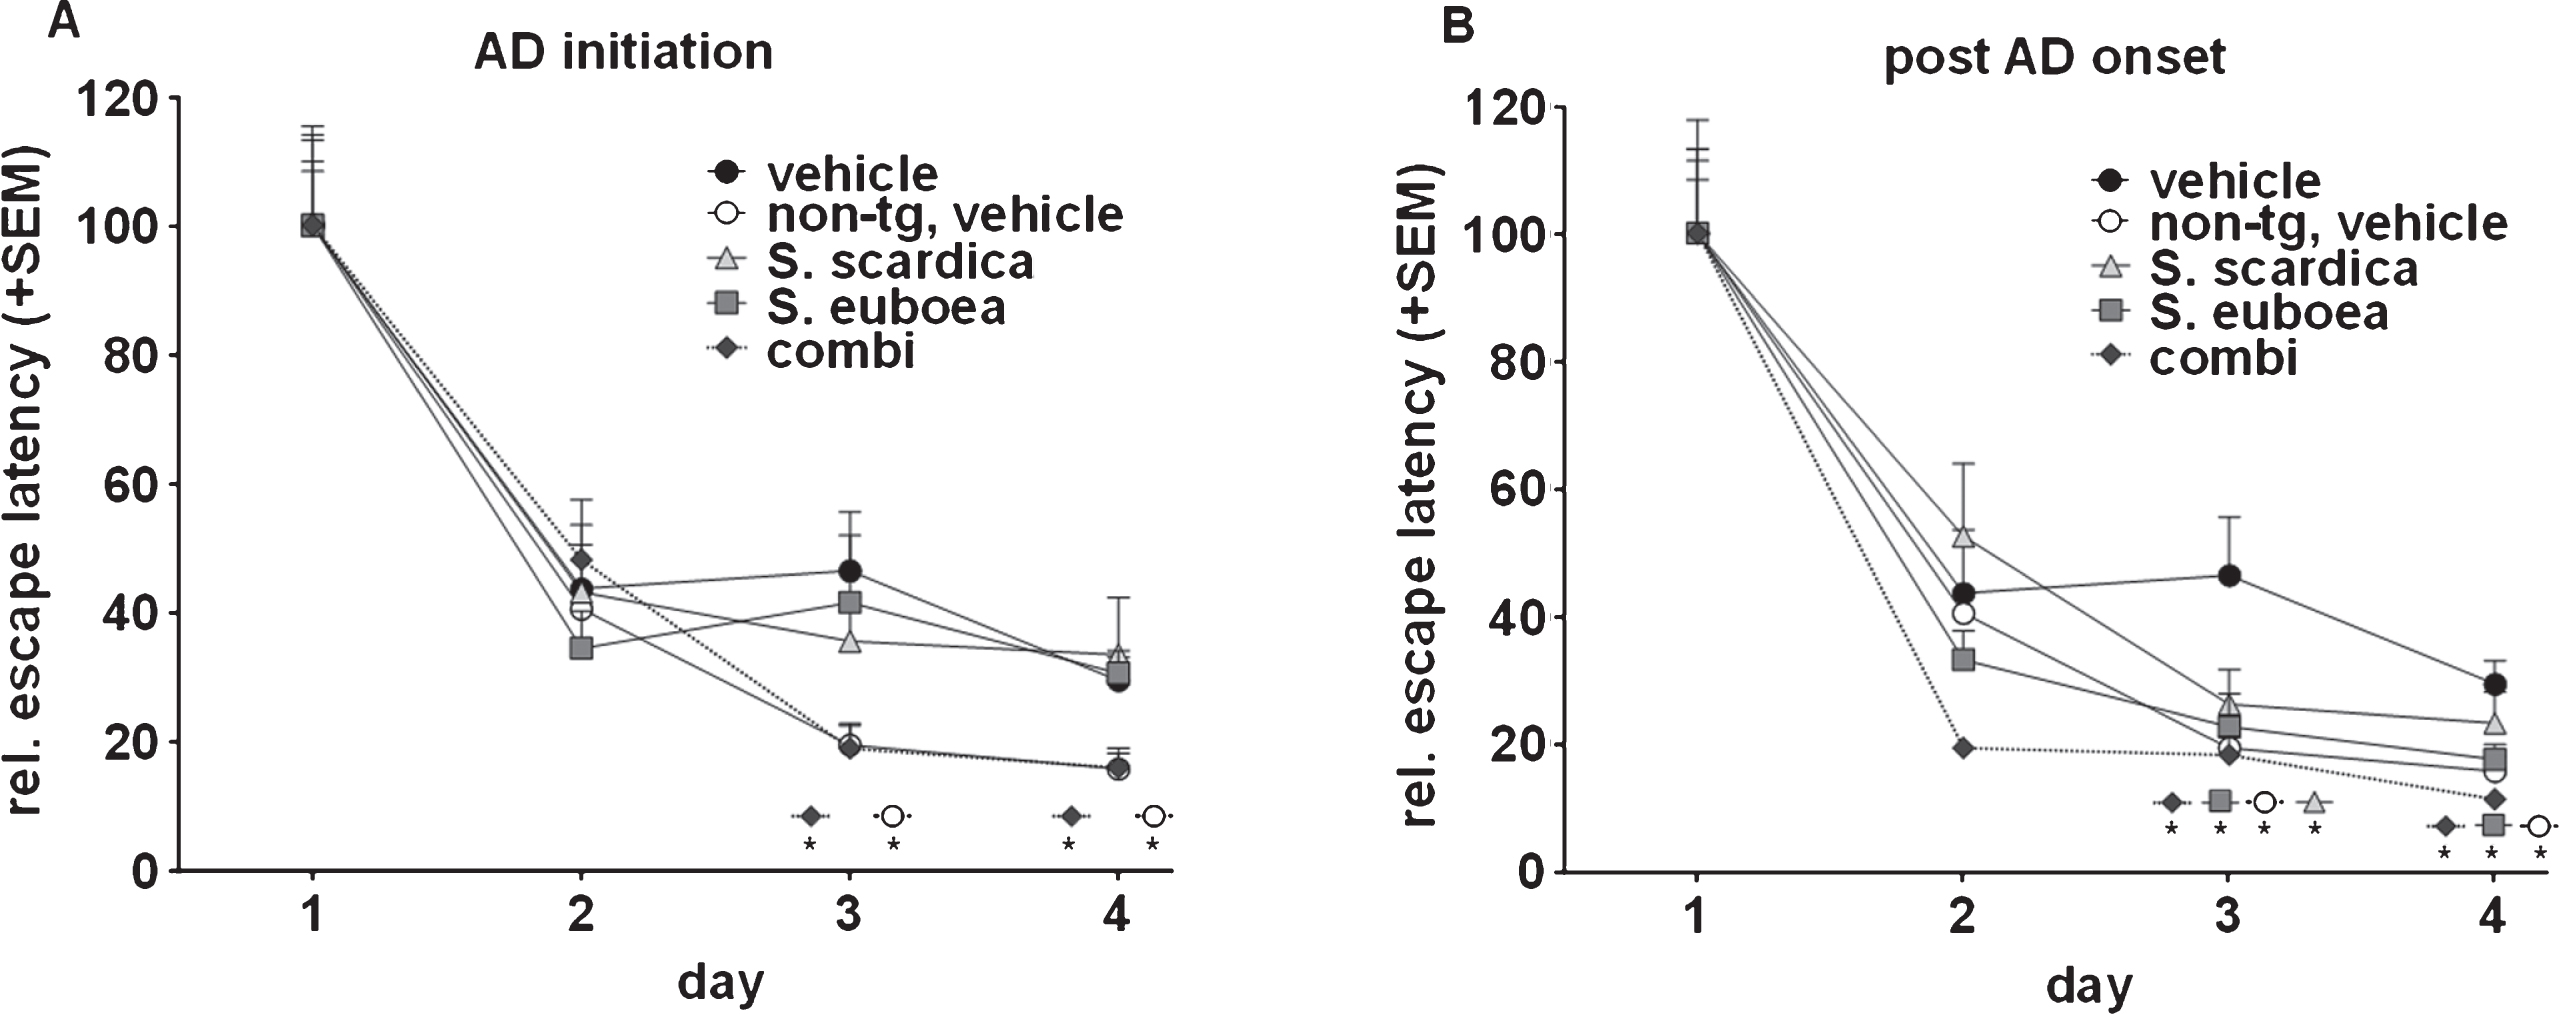 Sideritis spp. extracts improve memory performance in APP-tg mice. A) AD initiation treatment with the Sideritis spp. extract combination improves retentiveness and learning aptitude as shown by the significantly reduced escape latencies compared to vehicle treated APP-tg mice that are similar to vehicle-treated, non-transgenic mice. B) Decreased escape latency values of mice treated post-AD-onset with Sideritis spp. extracts in comparison to vehicle-treated control mice indicate increased spatial memory capabilities (mean + SEM, *p≤0.05).